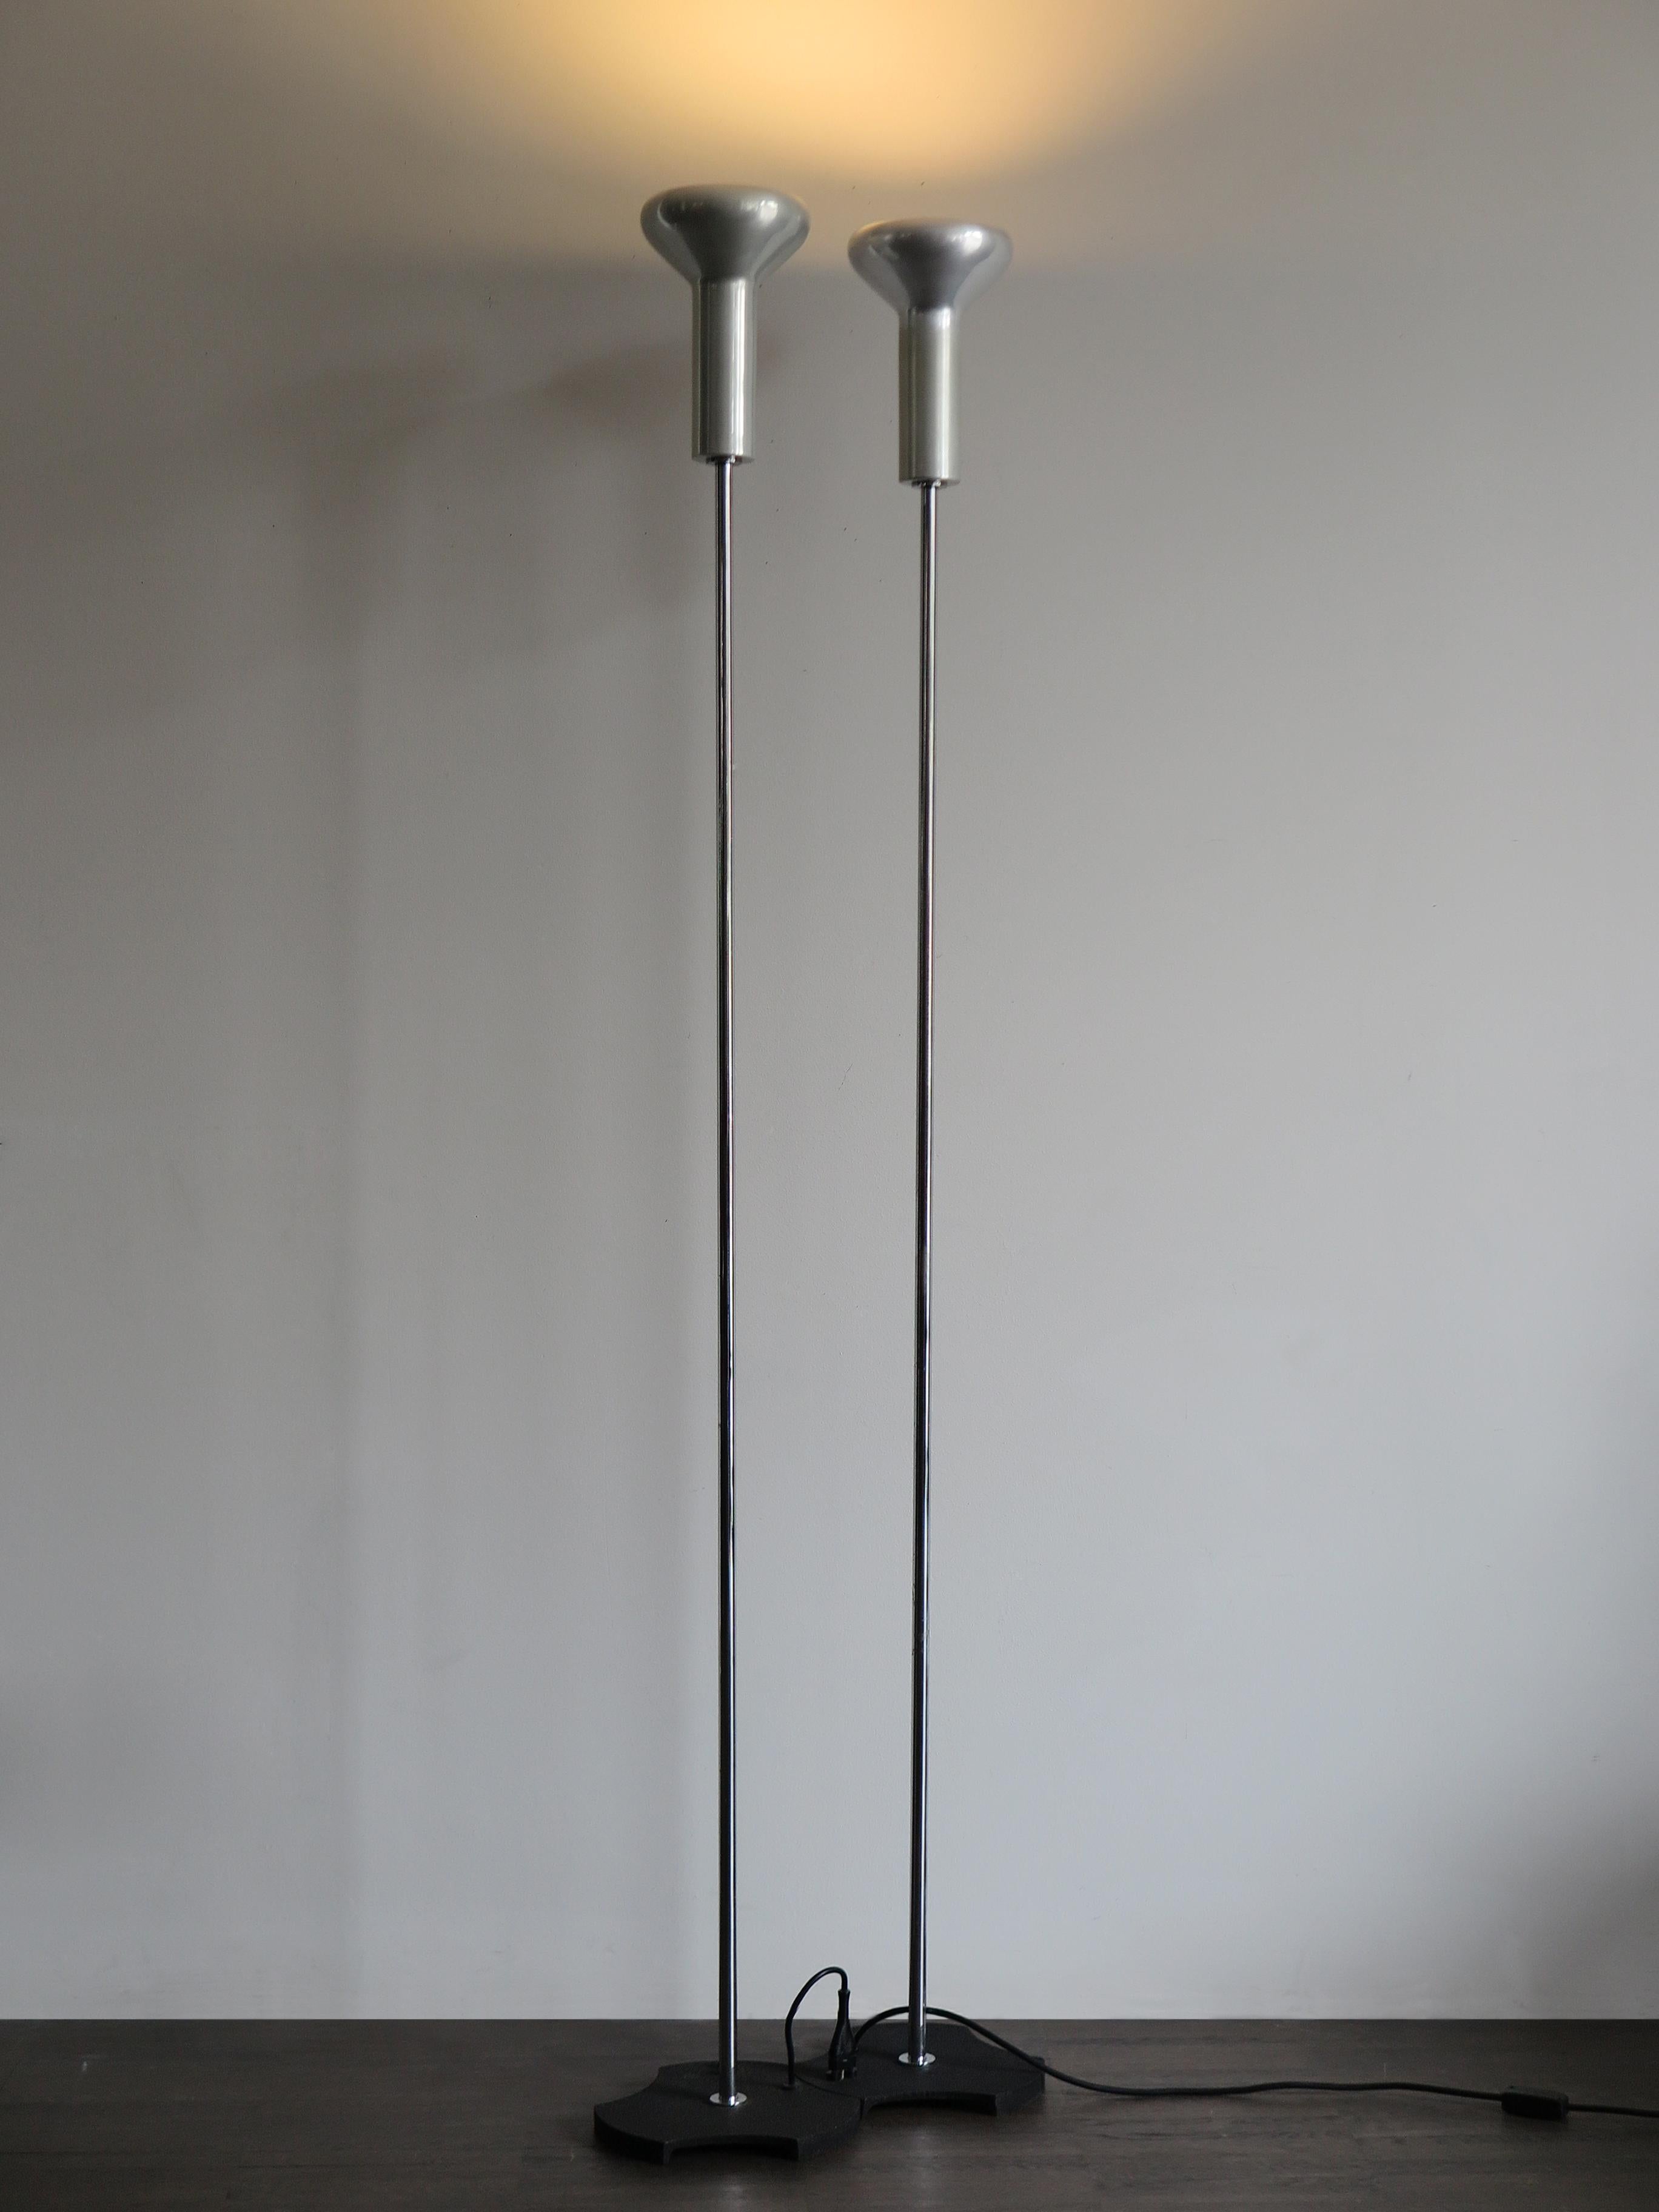 Italian Mid-Century Modern design couple of famous floor lamps model 1073, electrically connectable to each other, designed by Gino Sarfatti for Arteluce in 1956, reflectors in polished aluminum, stem in chromed steel and base in cast